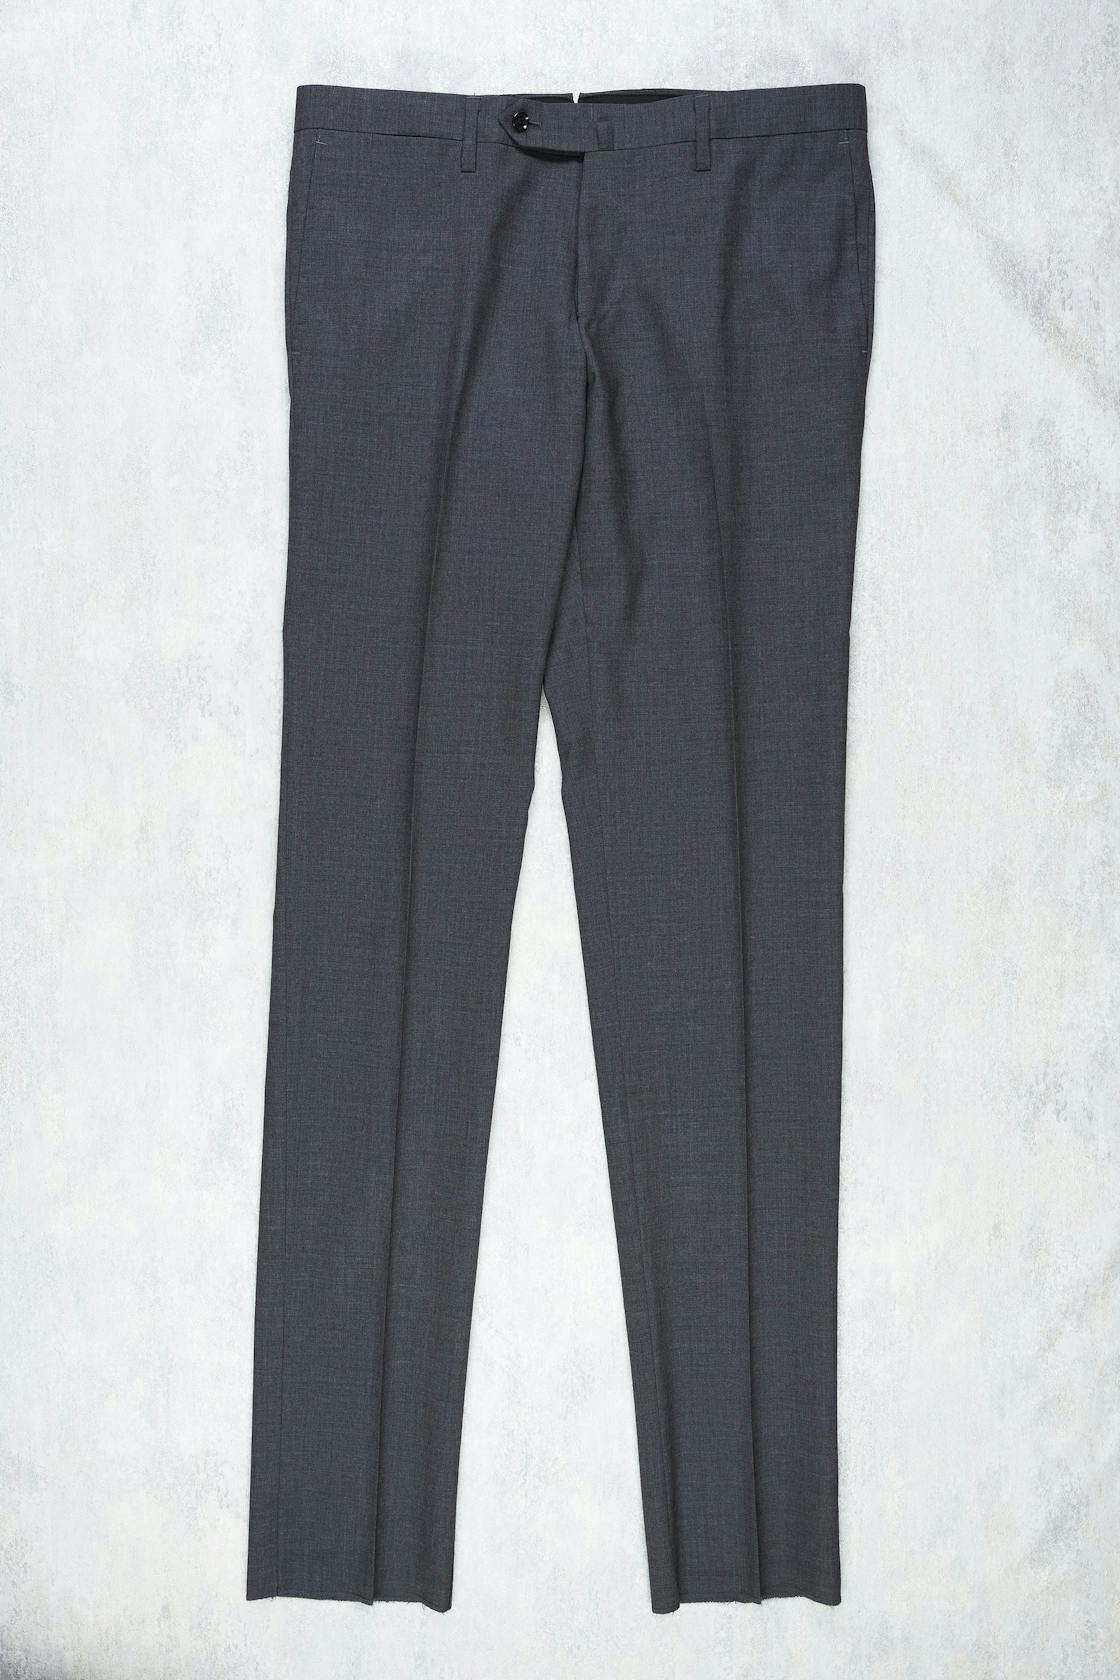 Ring Jacket S168 Grey Wool Trousers